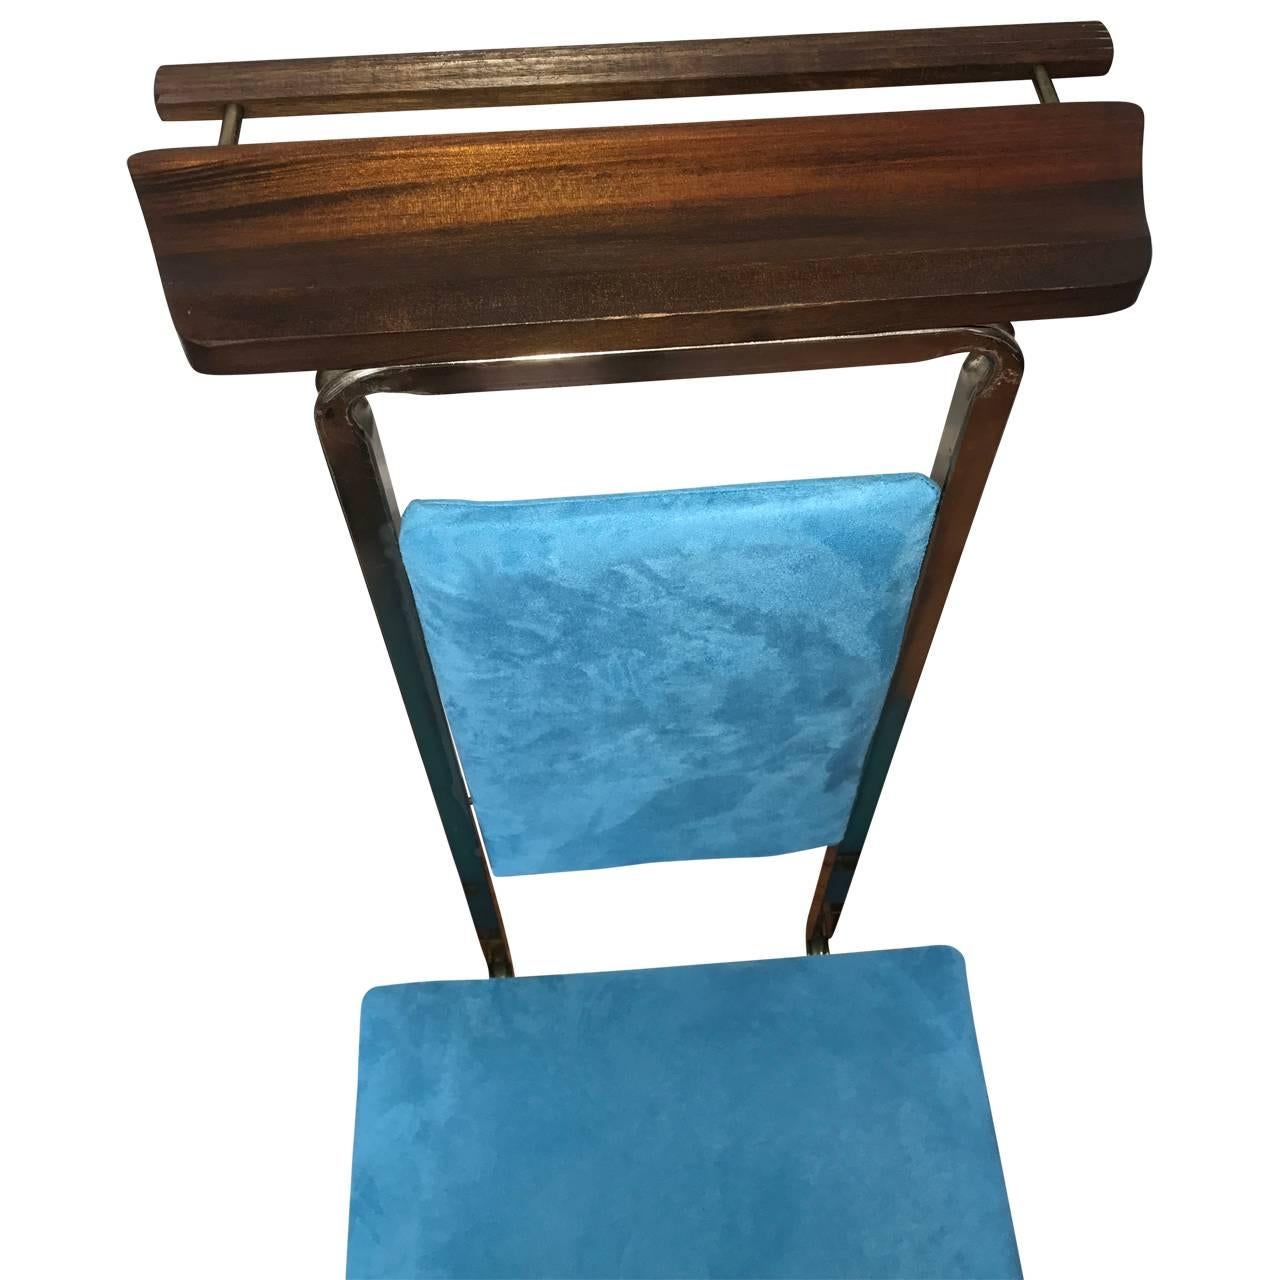 Newly upholstered vintage valet chair in a turquoise faux suede. Seat opens and can be used for storage.
$125 flat rate front door delivery includes Washington DC metro, Baltimore and Philadelphia